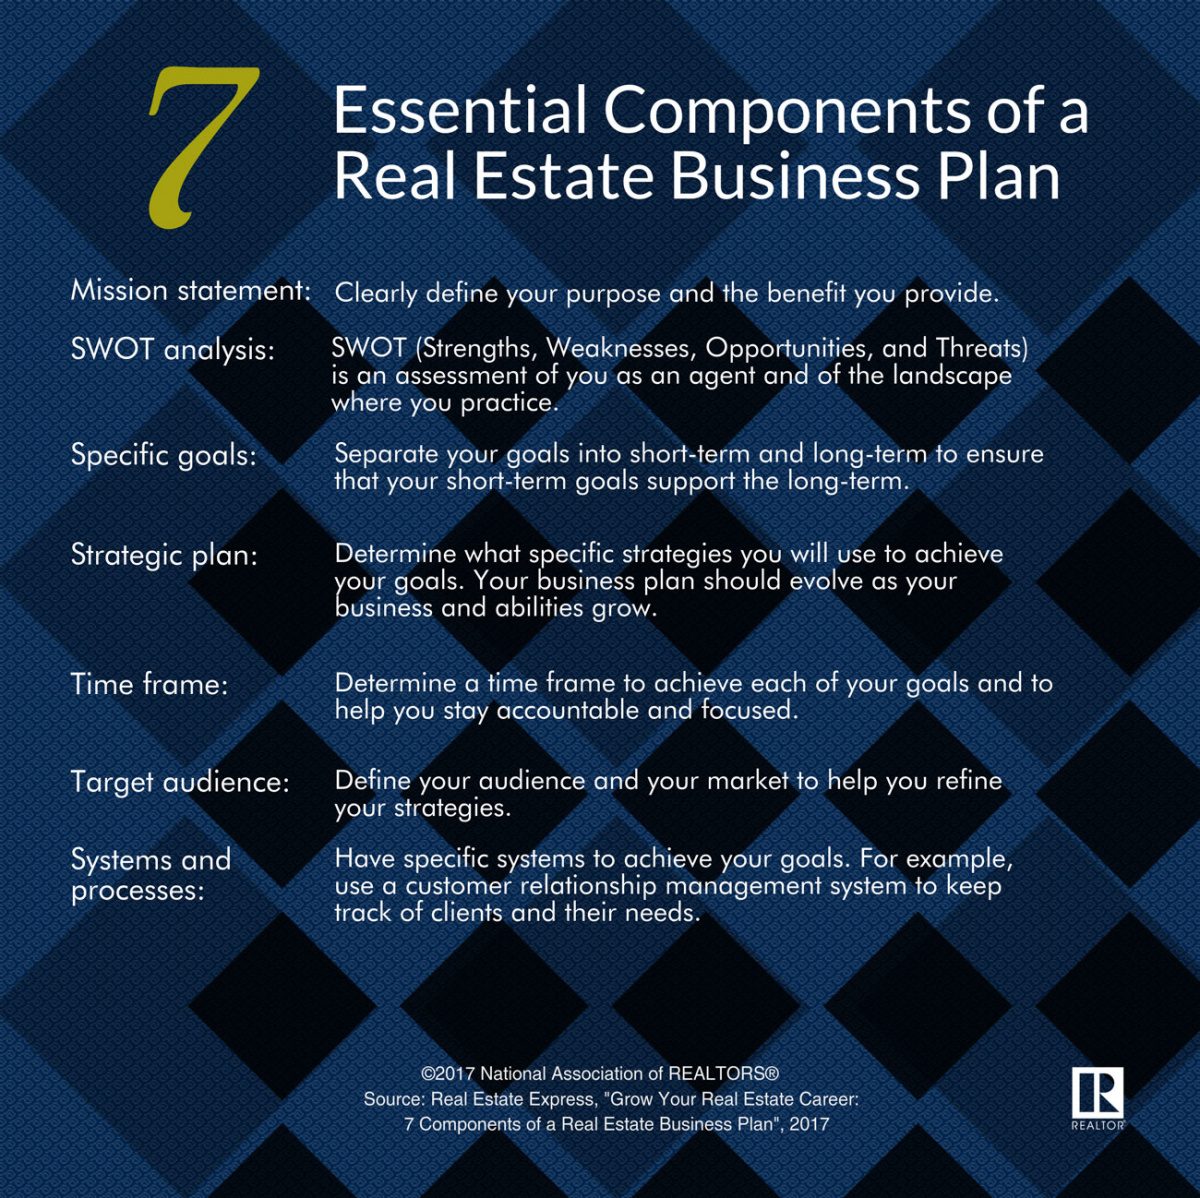 Essential Components of a Real Estate Business Plan